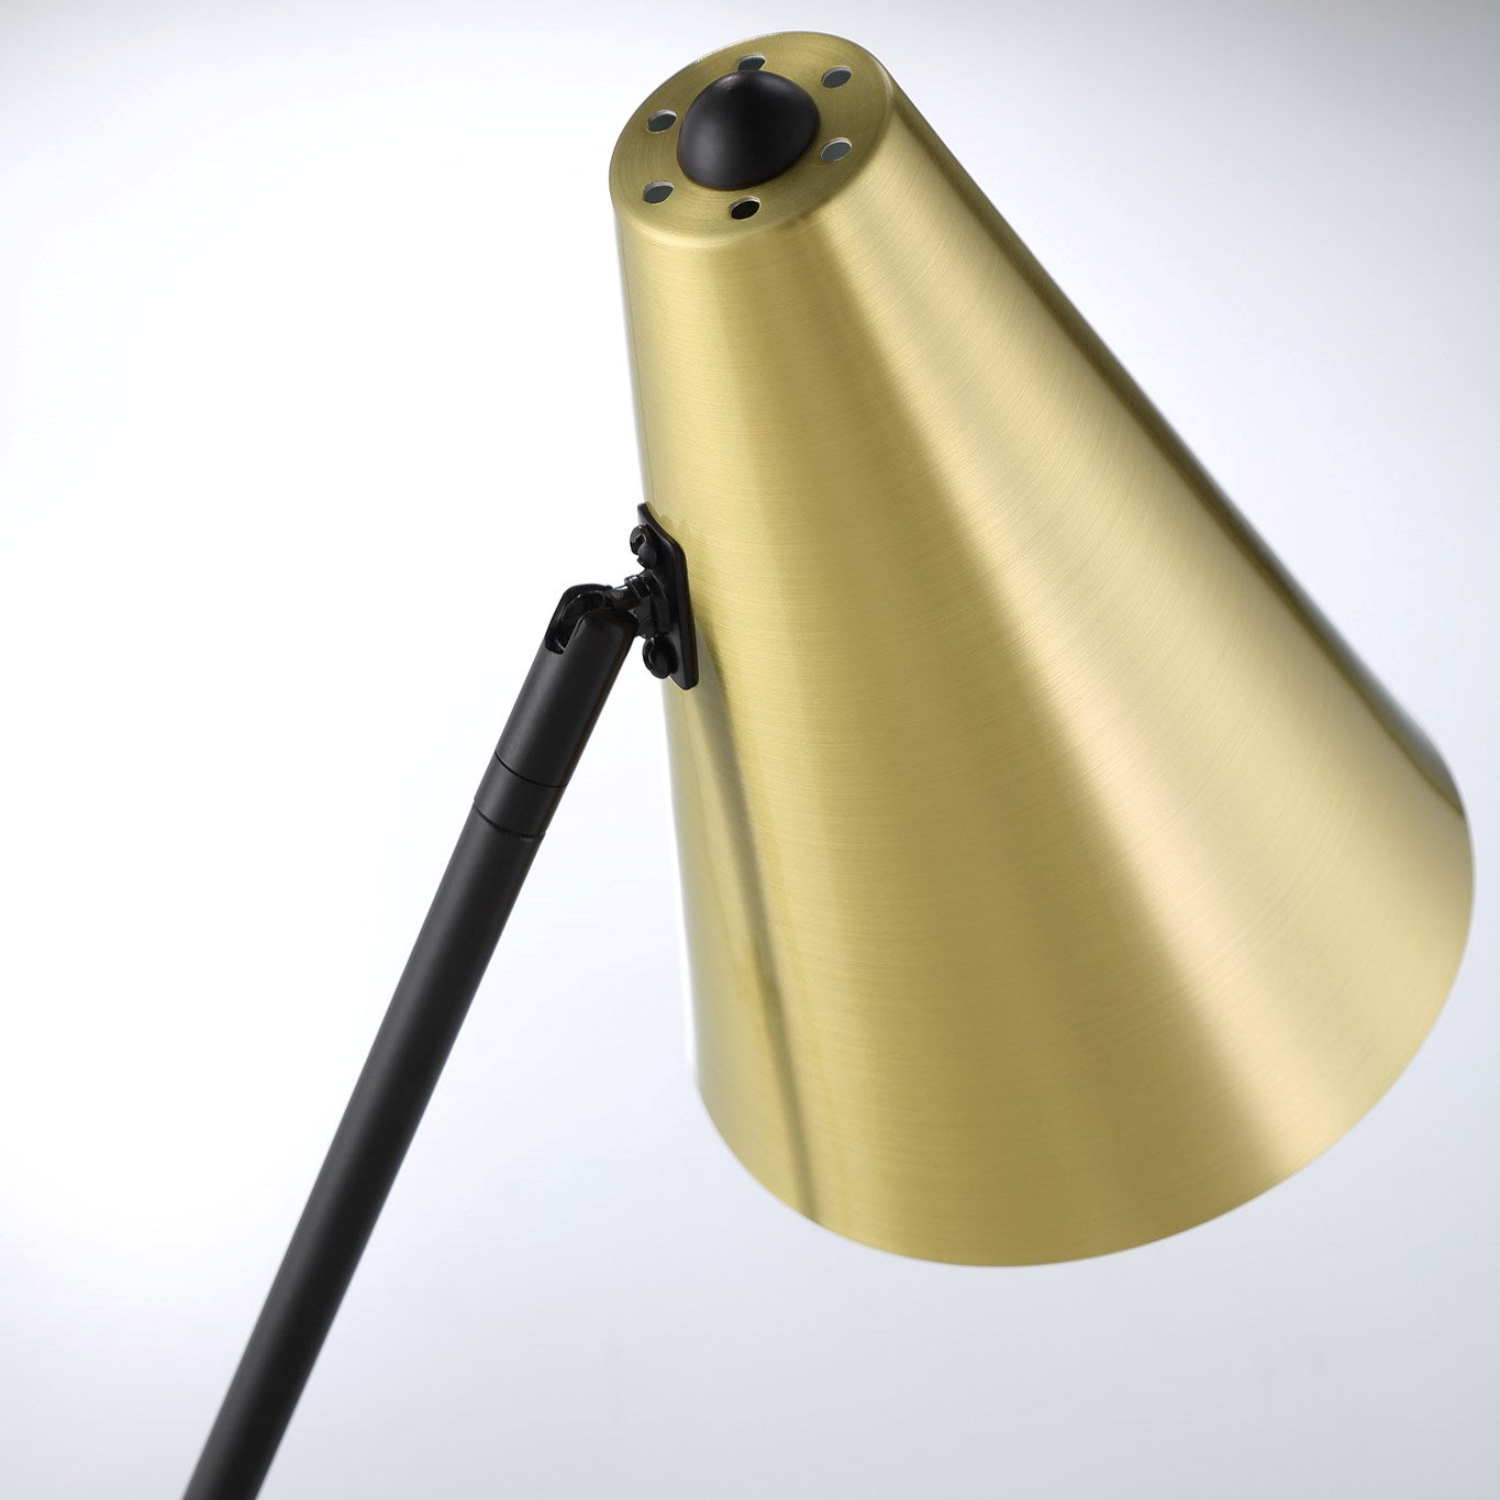 Cooper Desk Lamp Close Up of Head with Adjustable Neck